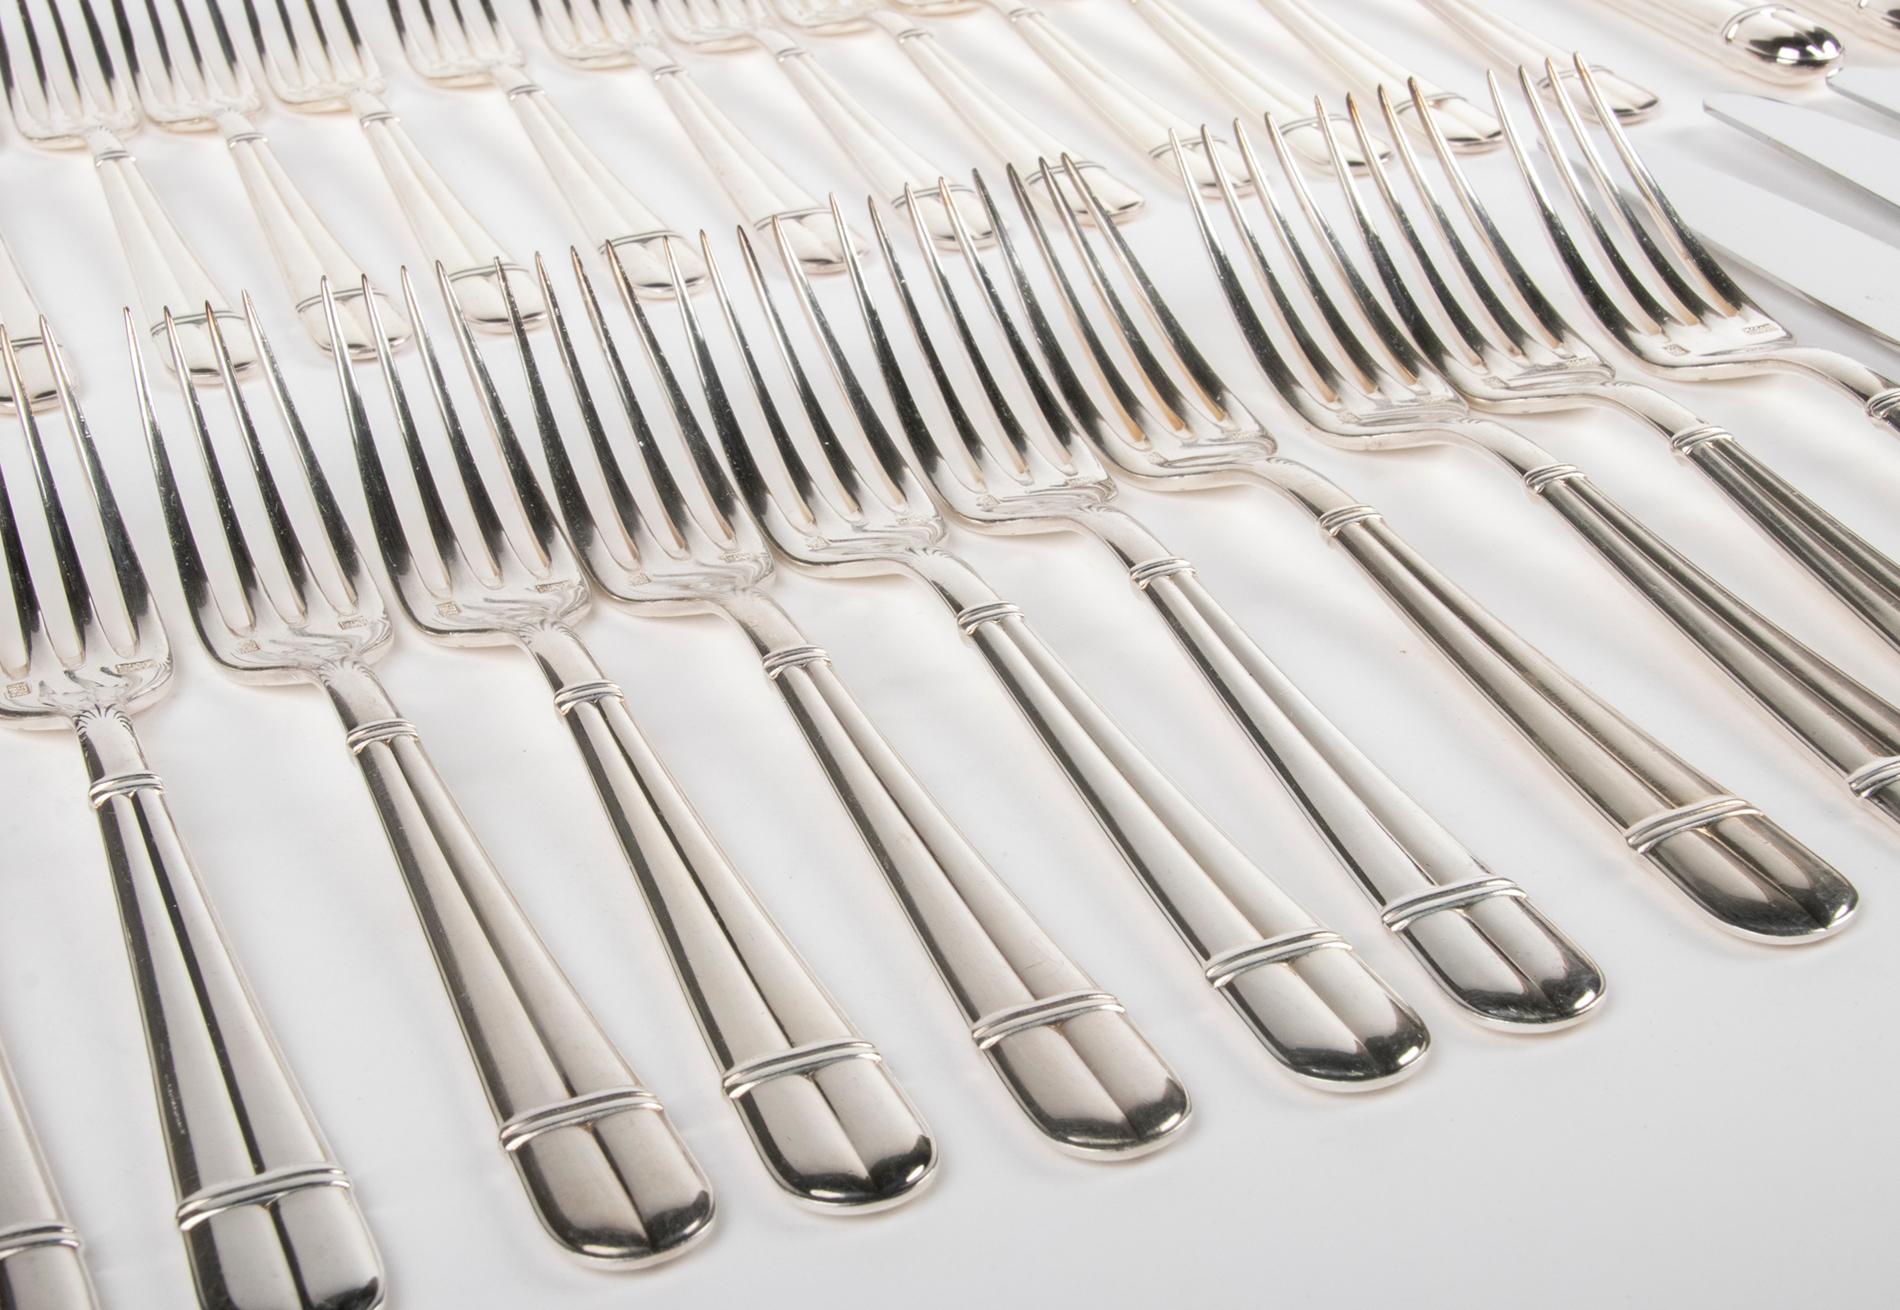 Contemporary 106-Piece Set of Silver Plated Cutlery from Ercuis, France